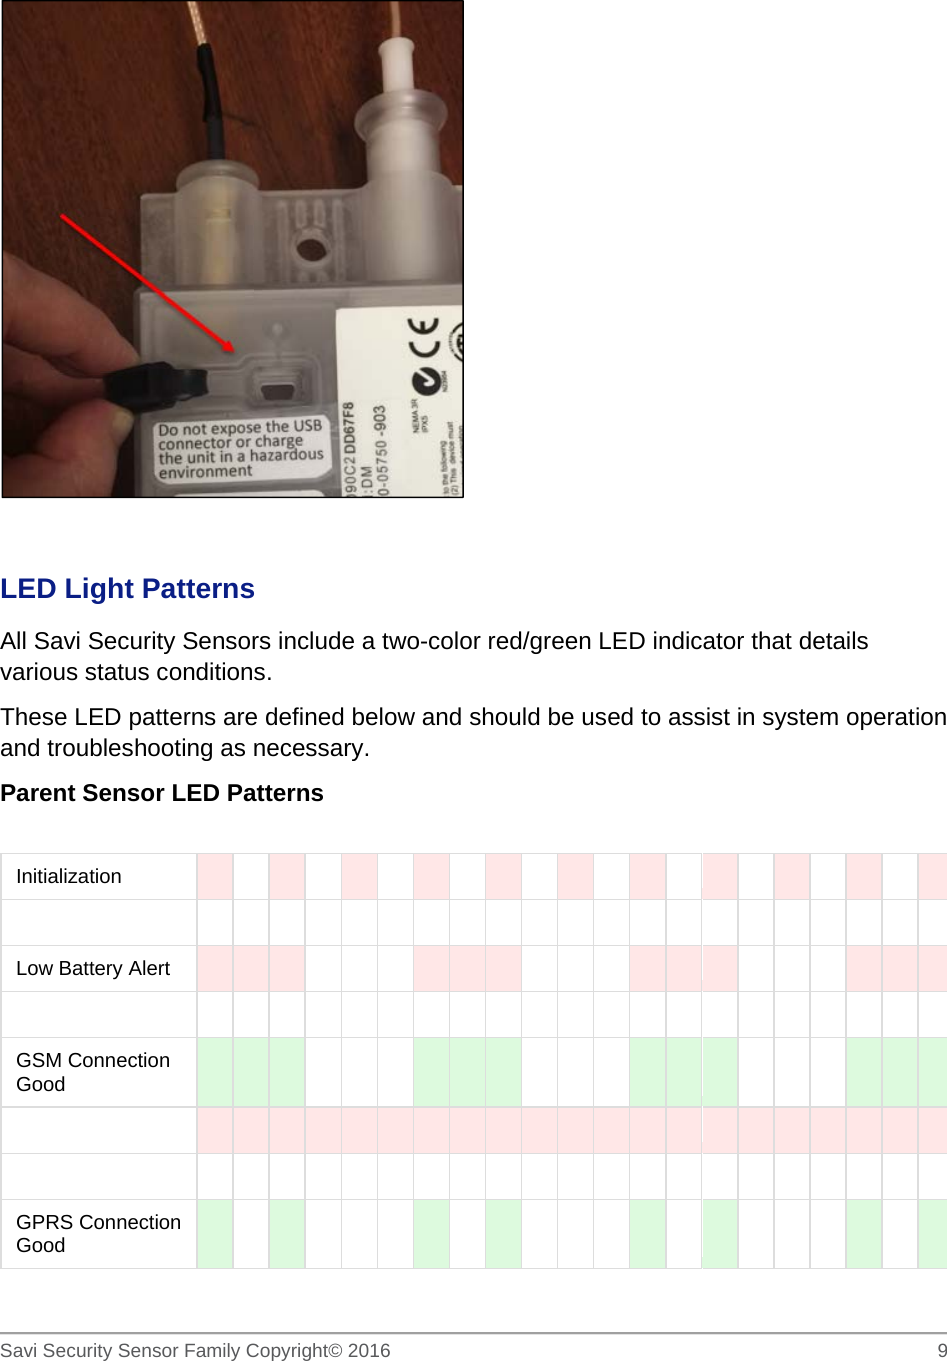   Savi Security Sensor Family Copyright© 2016     9    LED Light Patterns All Savi Security Sensors include a two-color red/green LED indicator that details various status conditions. These LED patterns are defined below and should be used to assist in system operation and troubleshooting as necessary. Parent Sensor LED Patterns  Initialization                                                                                                  Low Battery Alert                                                                                                    GSM Connection Good                                                                                                                                                         GPRS Connection Good                                          